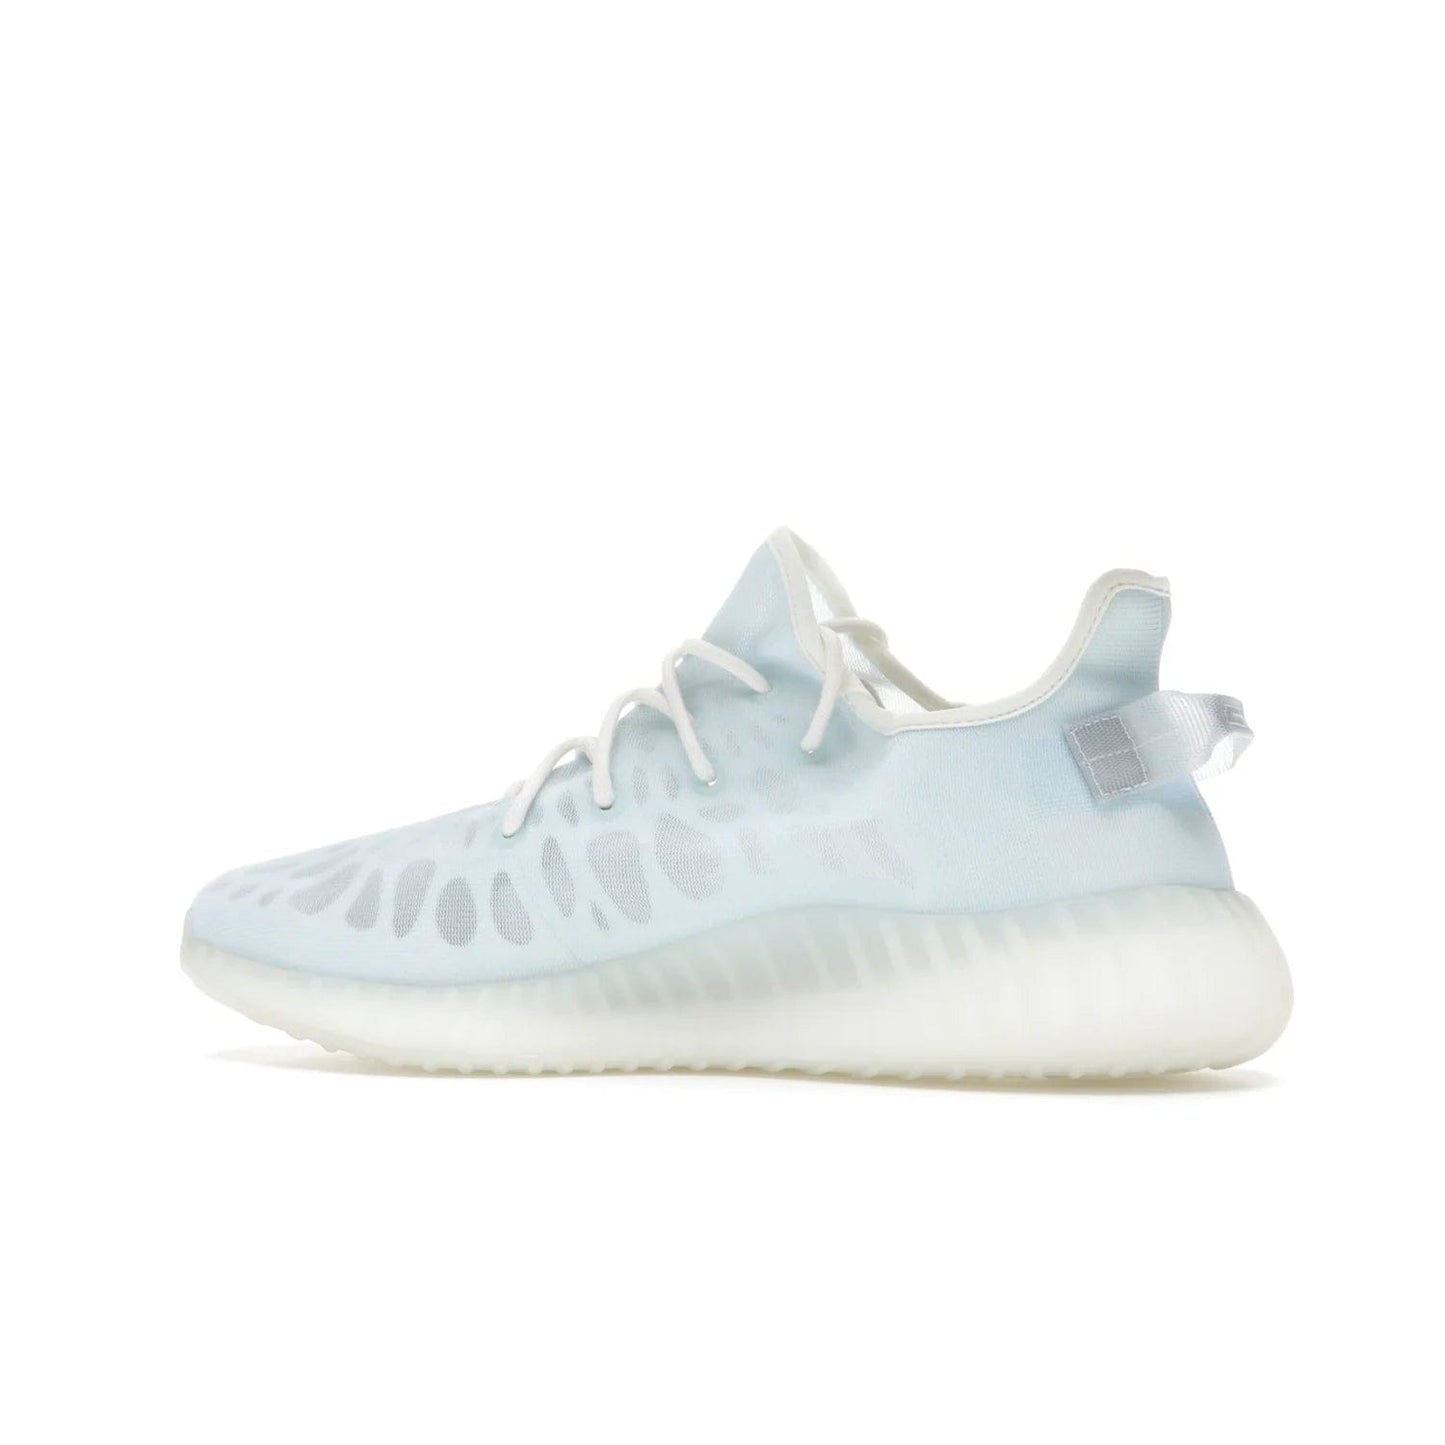 adidas Yeezy Boost 350 V2 Mono Ice - Image 21 - Only at www.BallersClubKickz.com - Introducing the adidas Yeezy 350 V2 Mono Ice - a sleek monofilament mesh design in Ice blue with Boost sole and heel pull tab. Released exclusively in the US for $220.